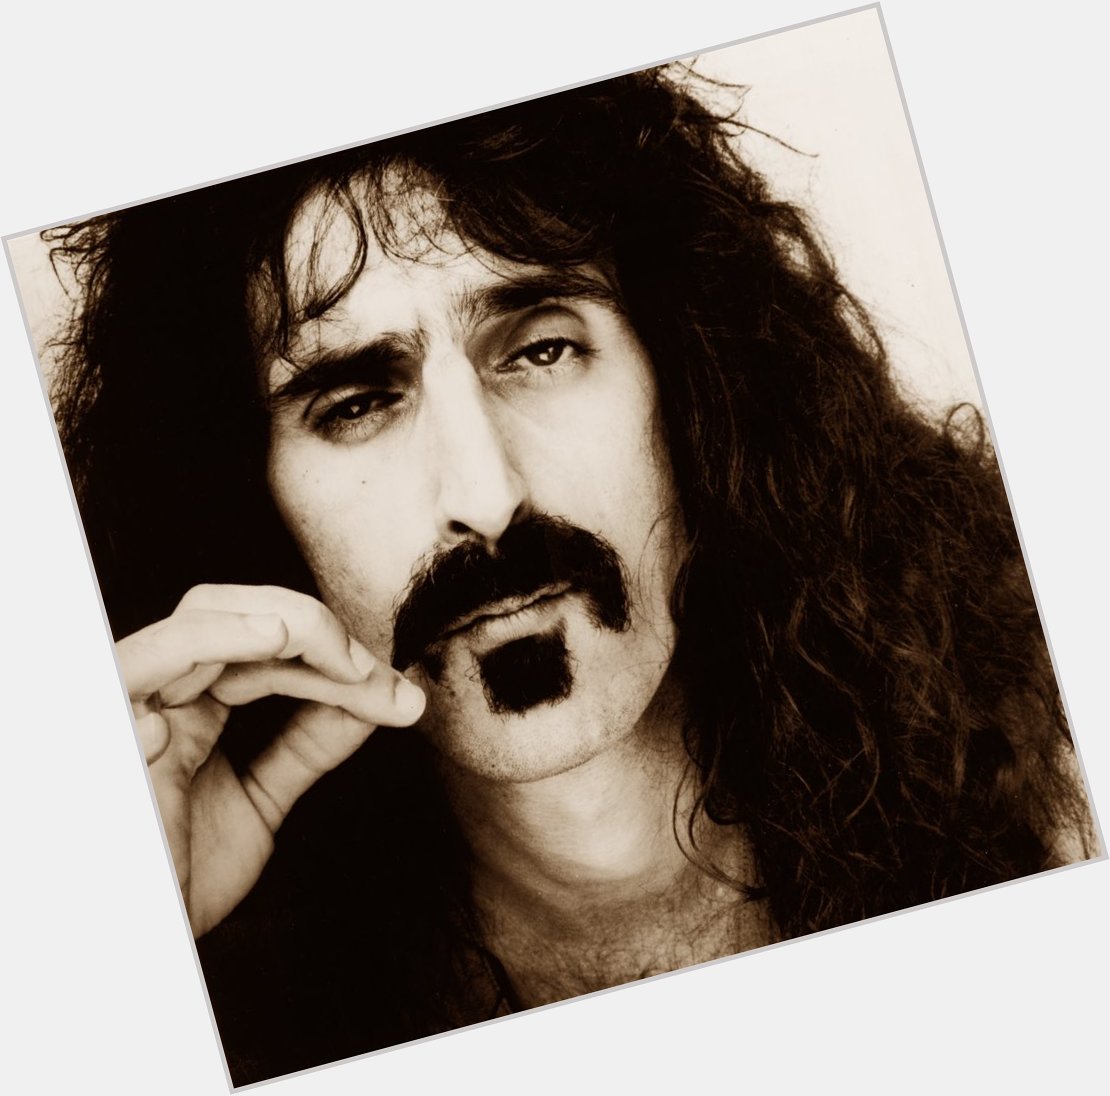 Happy Birthday to one of the greatest musicians of all time... The legendary Frank Zappa. May your music live on! 